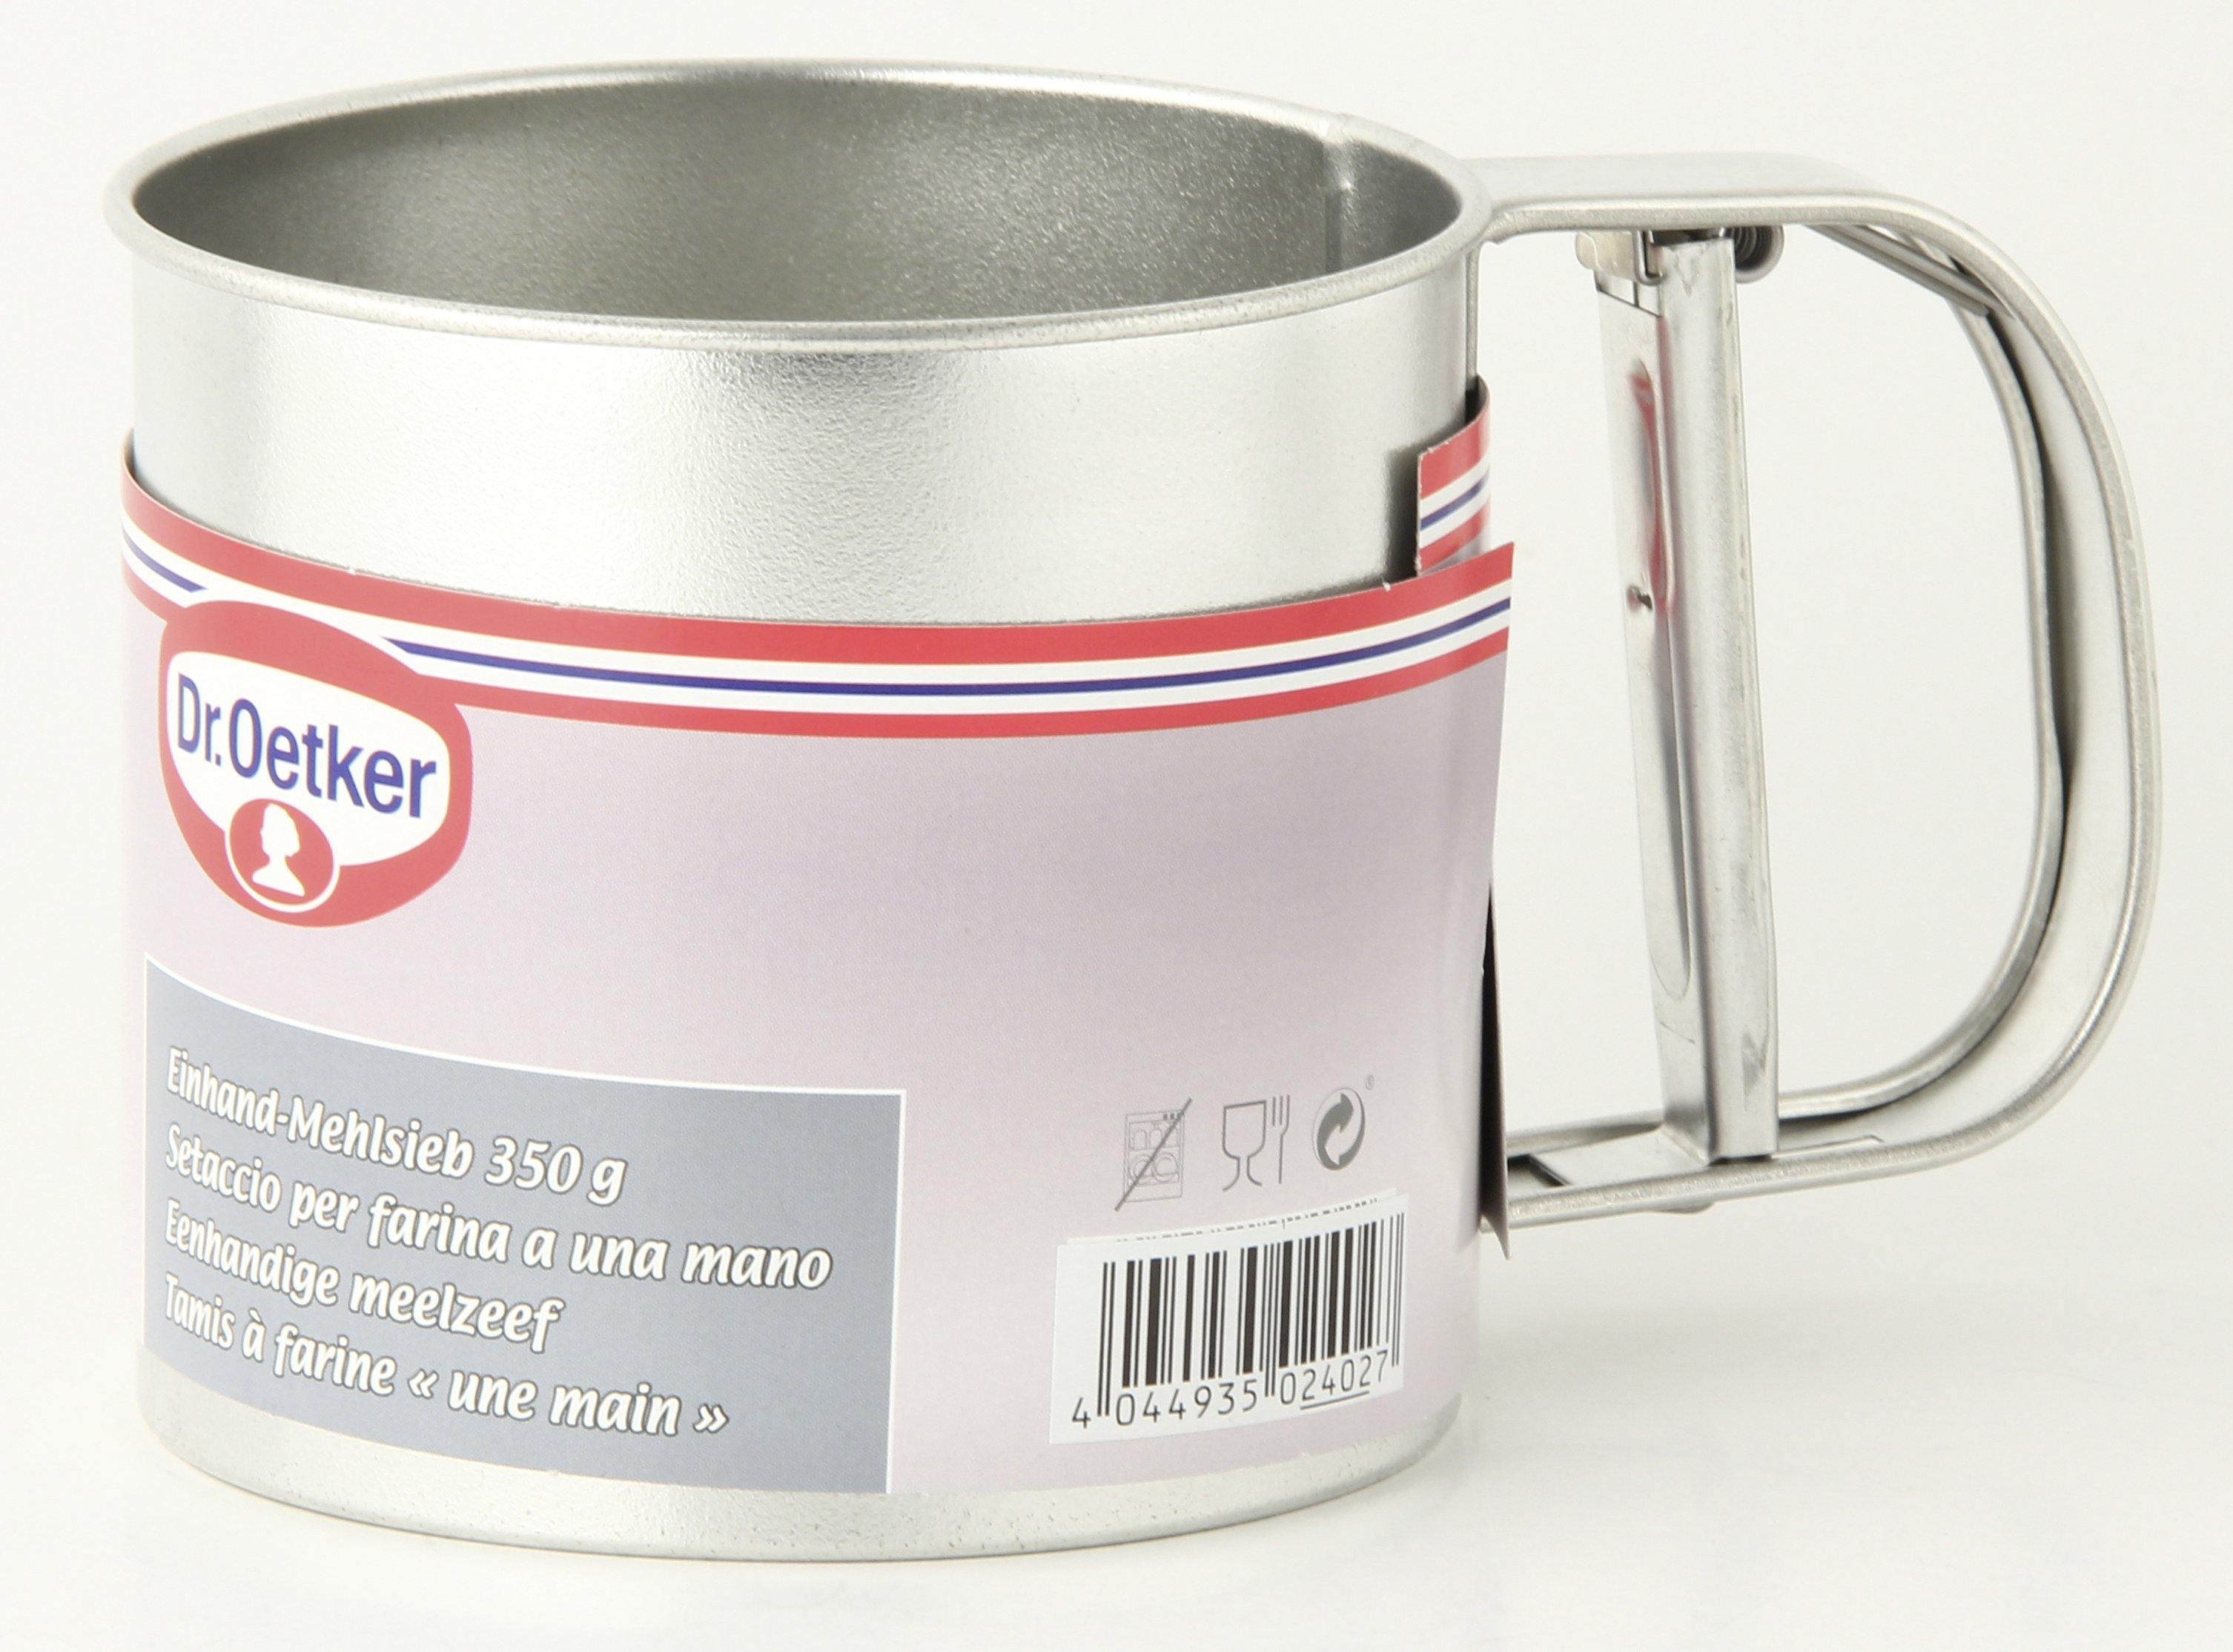 Dr. Oetker One-Hand Flour Sifter Metal 350G, Silver, 10.5X9.5 Cm - Whole and All